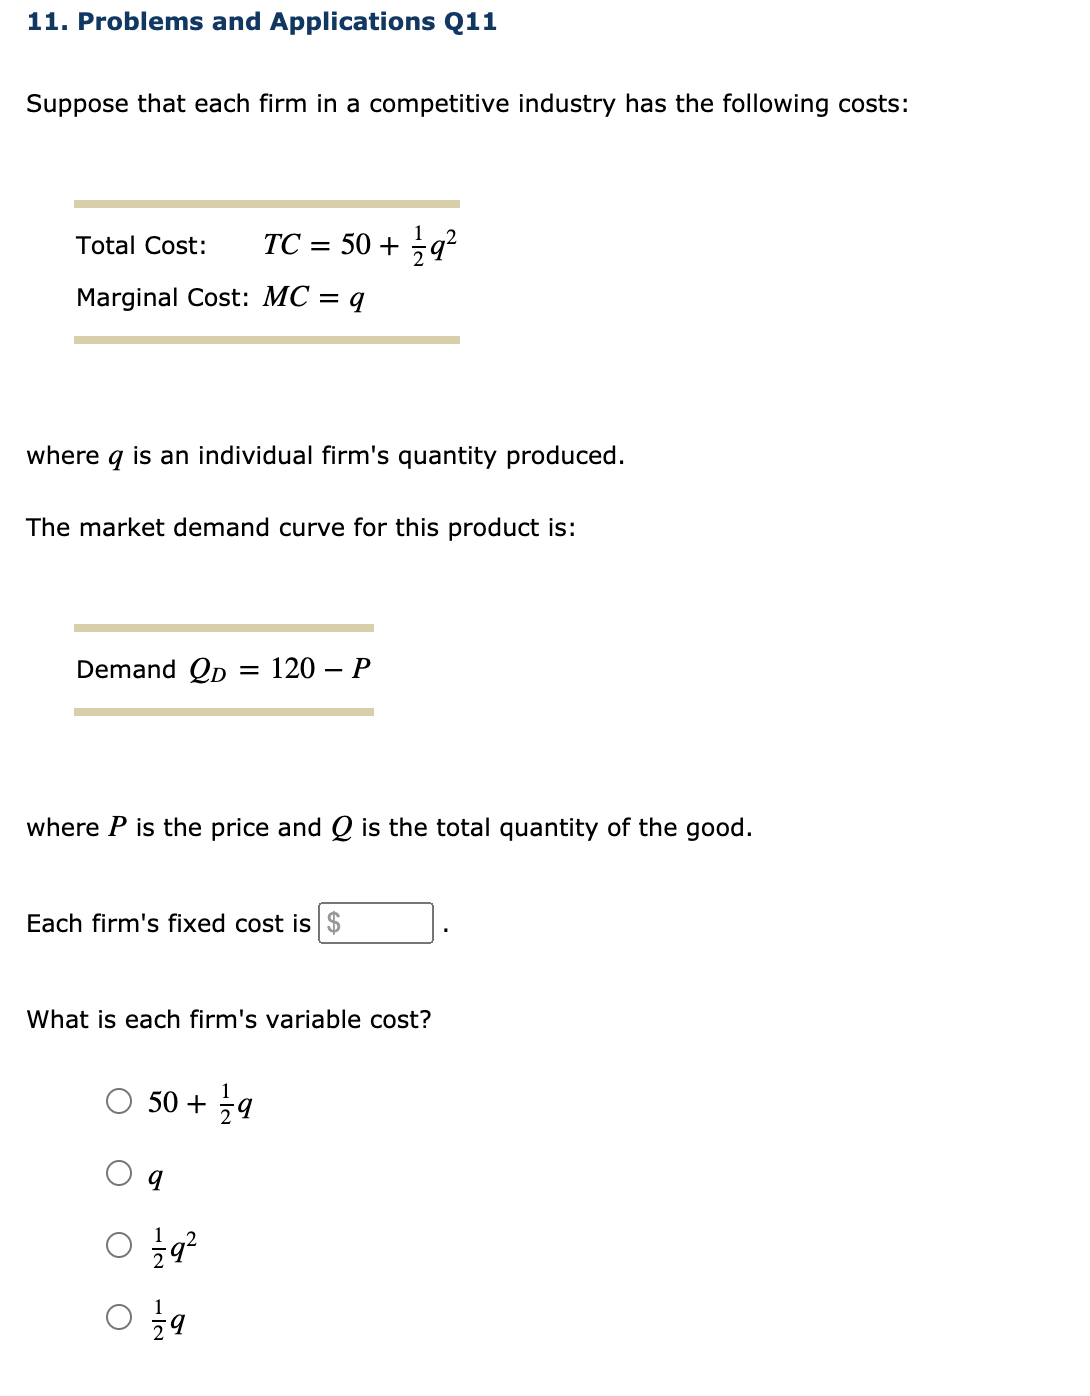 11. Problems and Applications Q11
Suppose that each firm in a competitive industry has the following costs:
Total Cost:
TC = 50 + q?
Marginal Cost: MC = q
where q is an individual firm's quantity produced.
The market demand curve for this product is:
Demand Qp
= 120 – P
where P is the price and Q is the total quantity of the good.
Each firm's fixed cost is $
What is each firm's variable cost?
50 + 9
